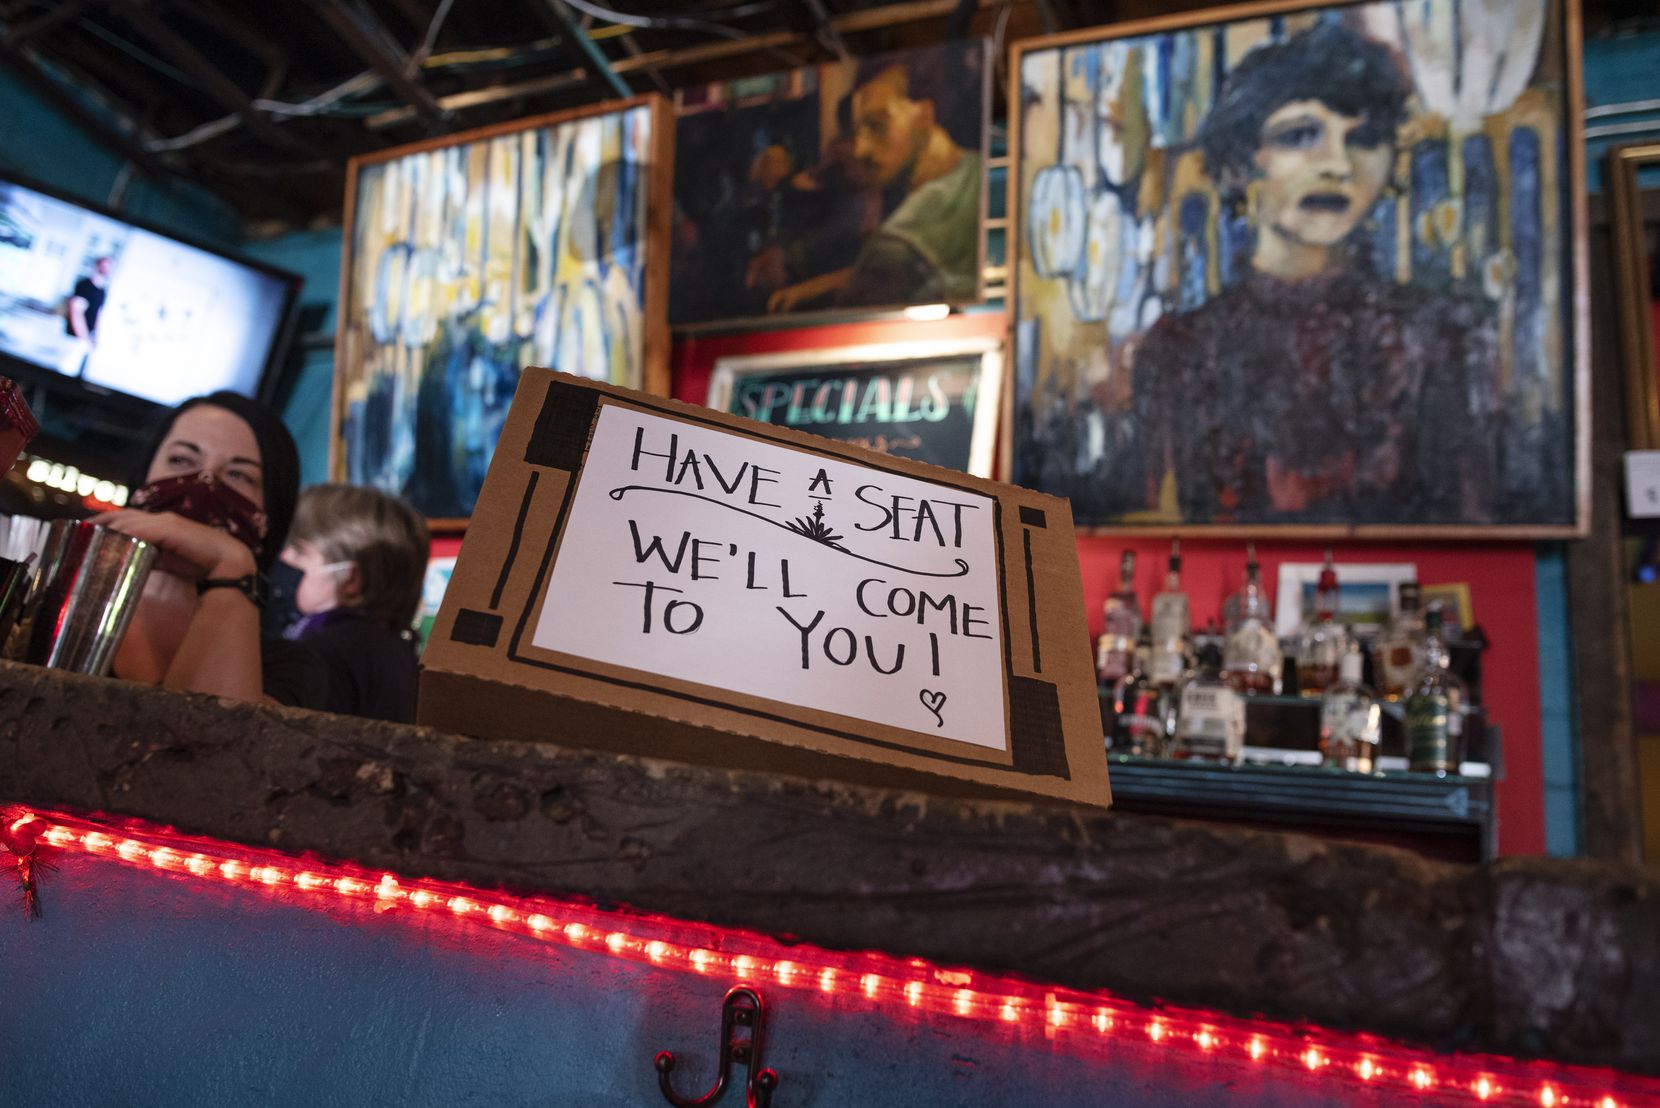 Dan's Silverleaf in Denton had signs in place to help make social distancing easier on Wednesday.